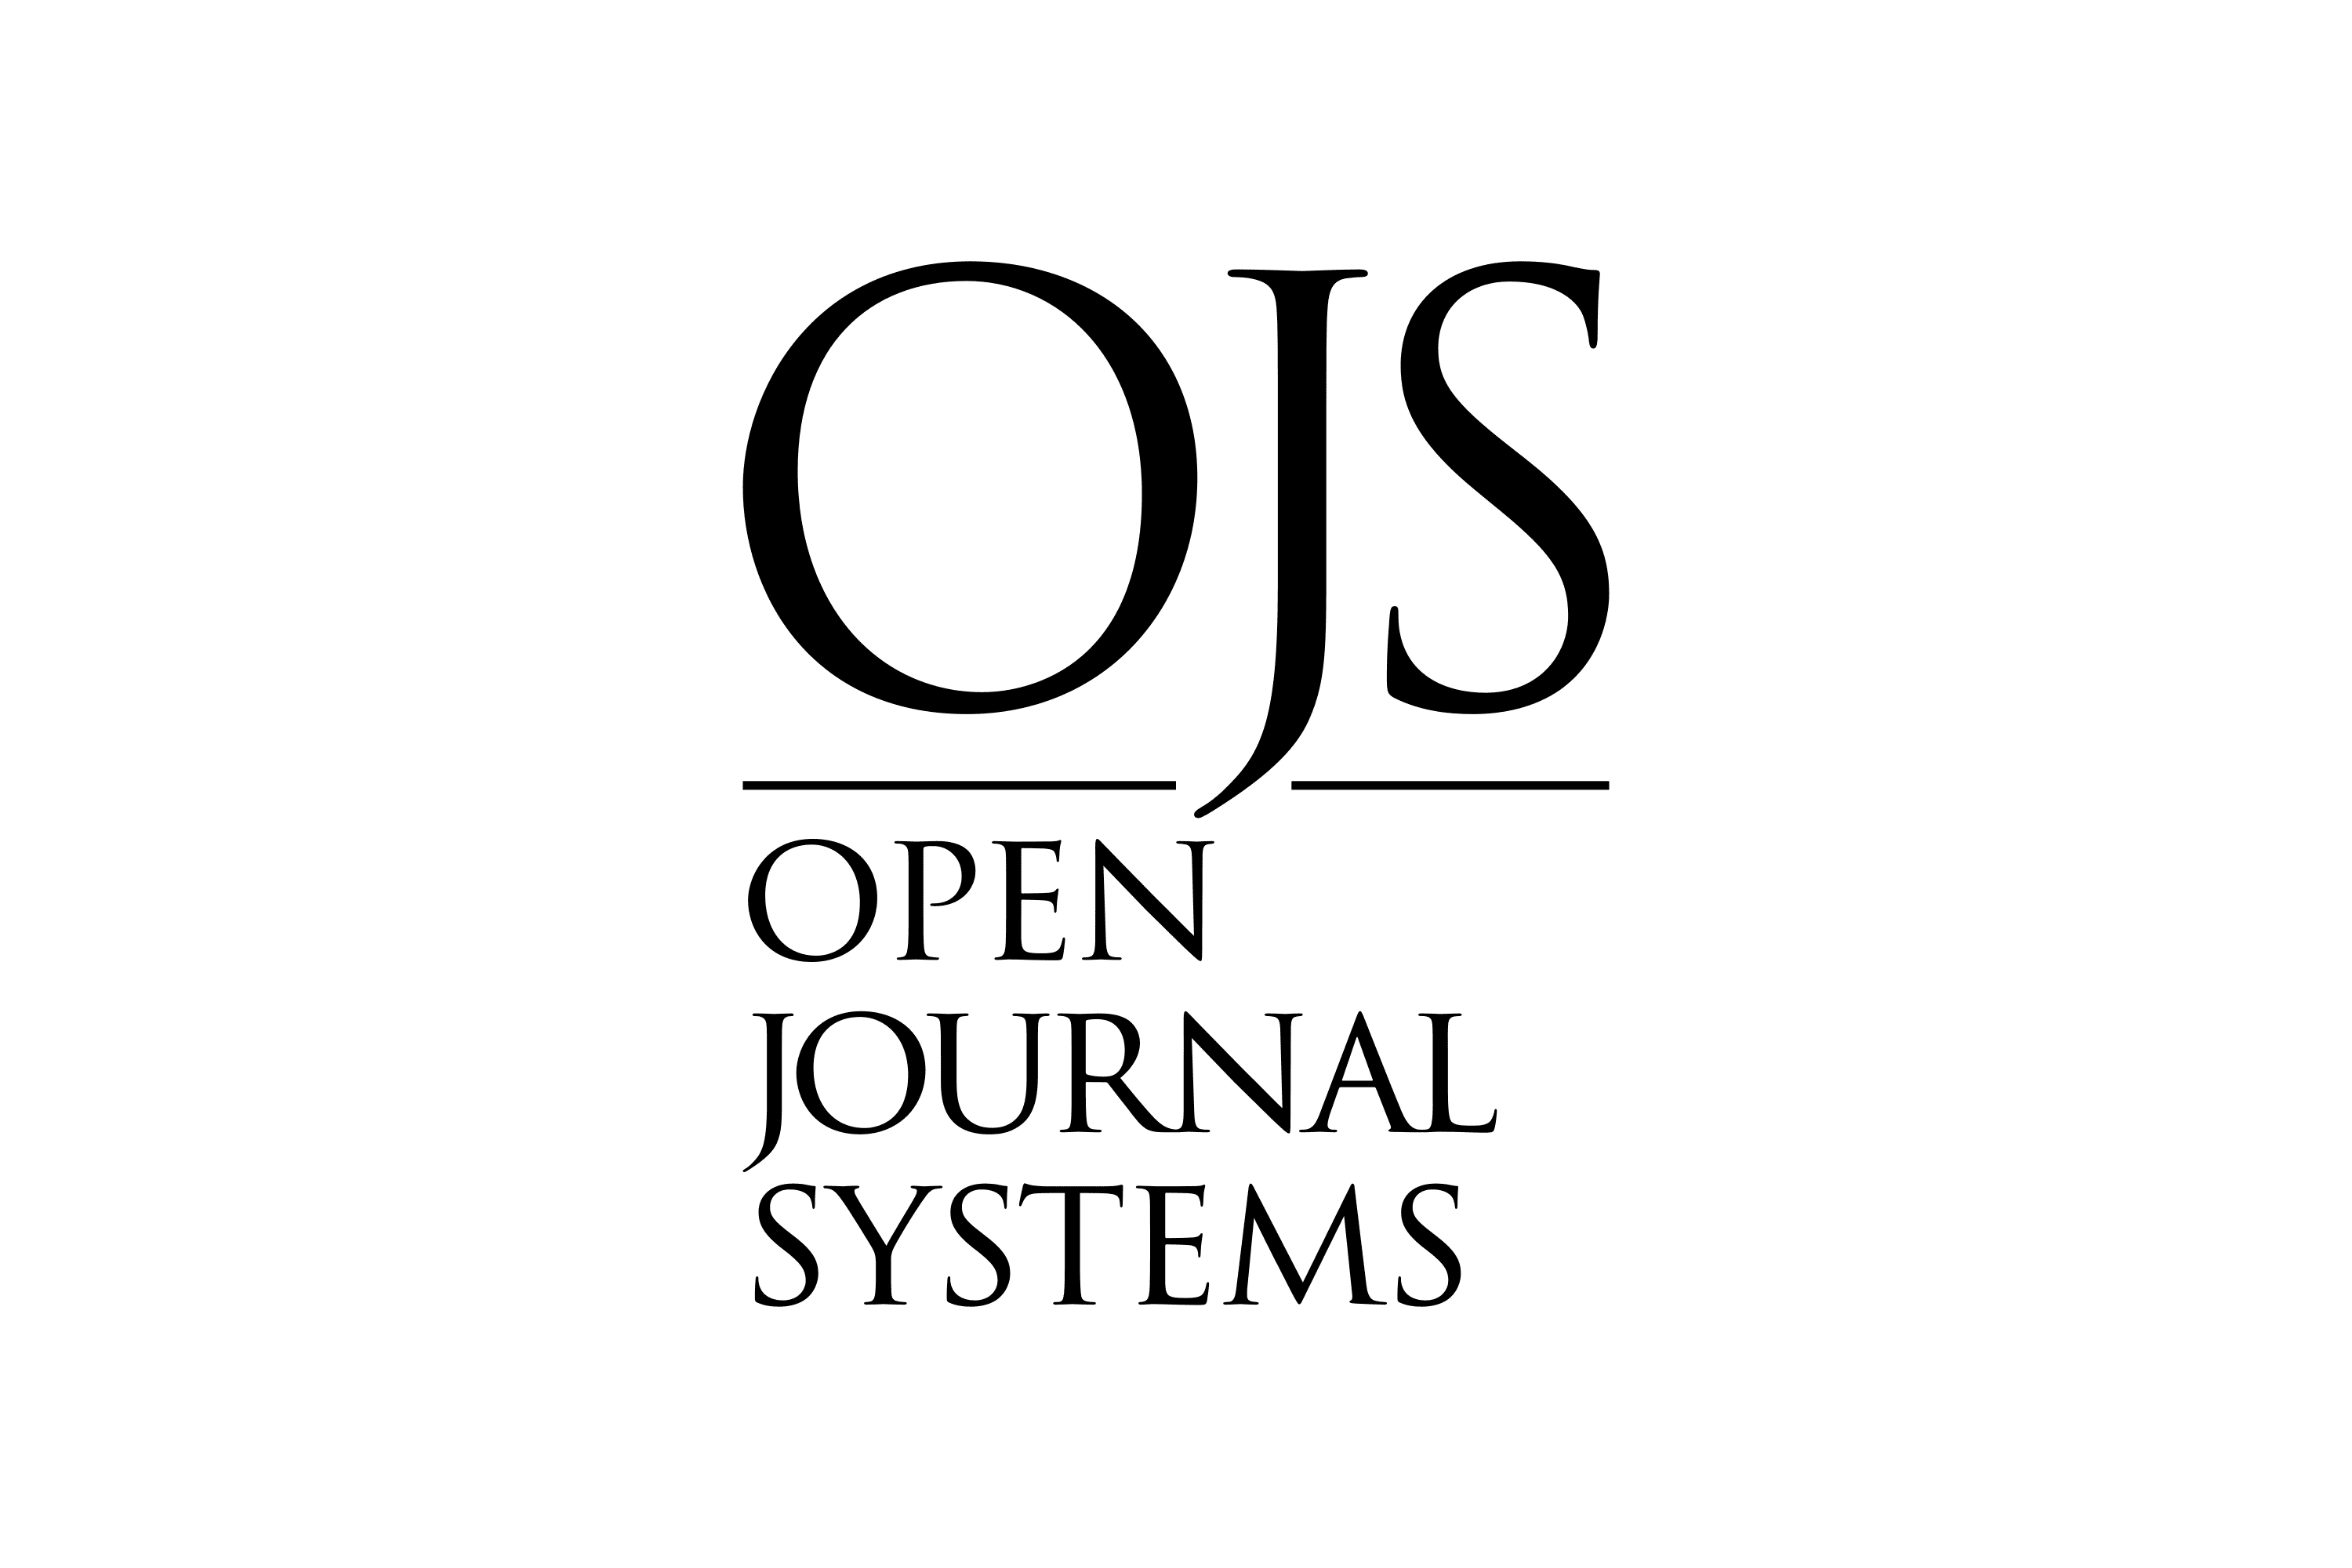 What is OJS?